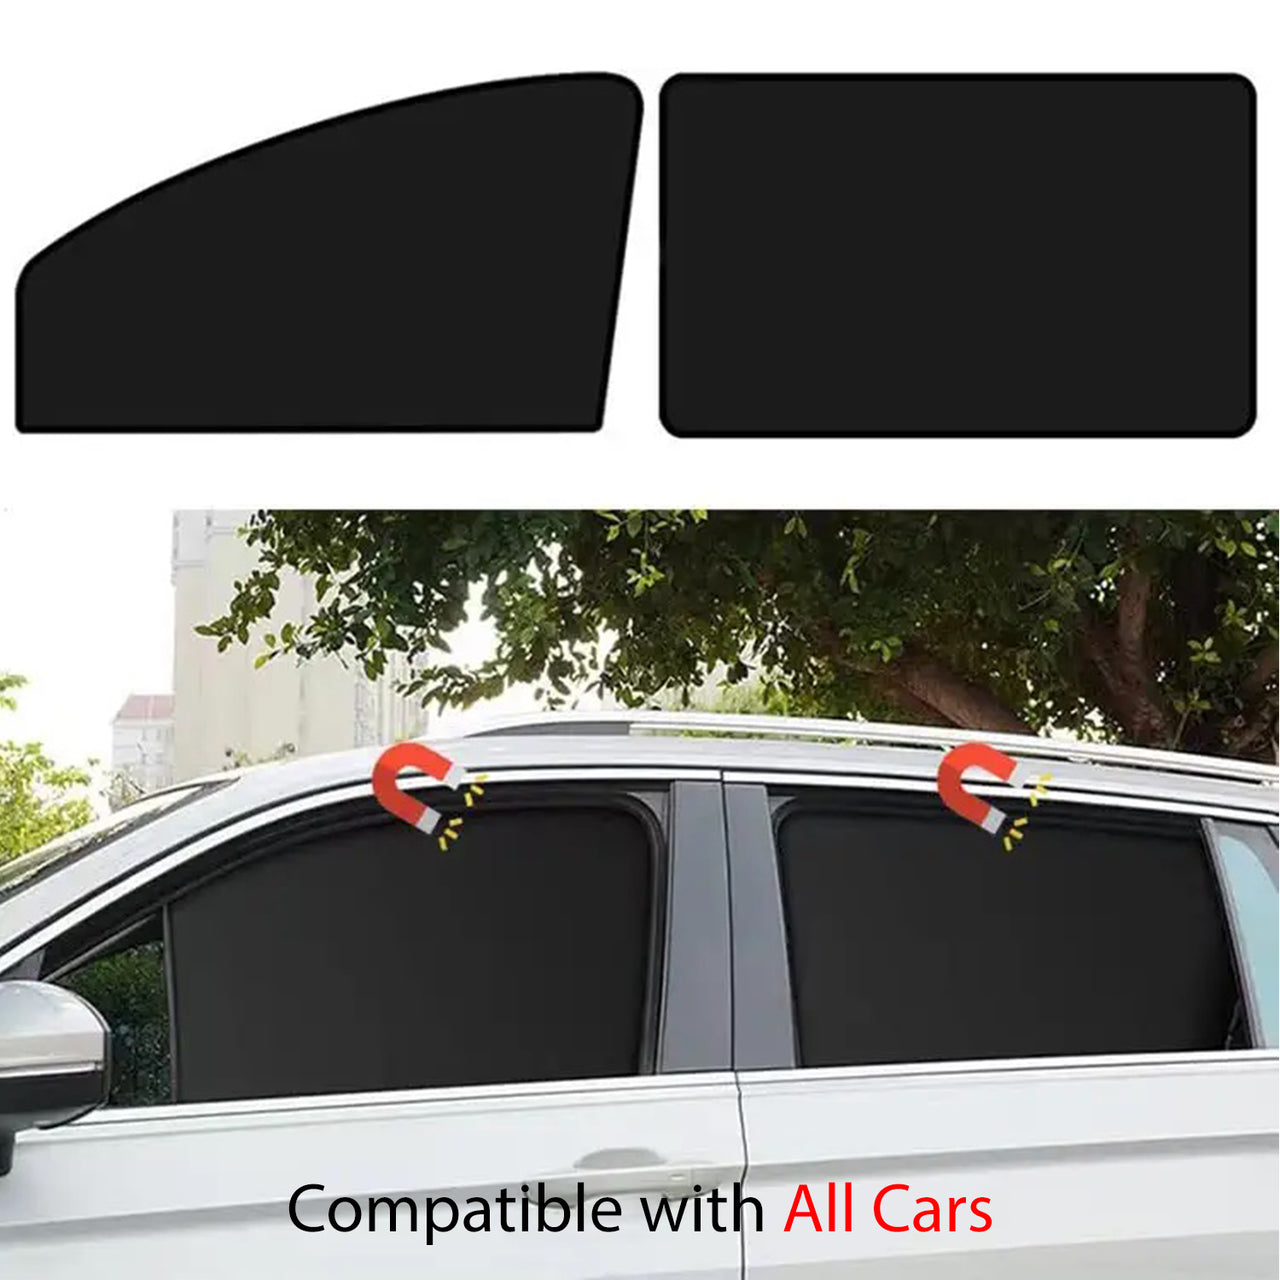 Car Side Window Sun Shades, Custom Fit For Your Cars, Window Sunshades Privacy Curtains, 100% Block Light for Breastfeeding, Taking a nap, Changing Clothes, Camping LI5980